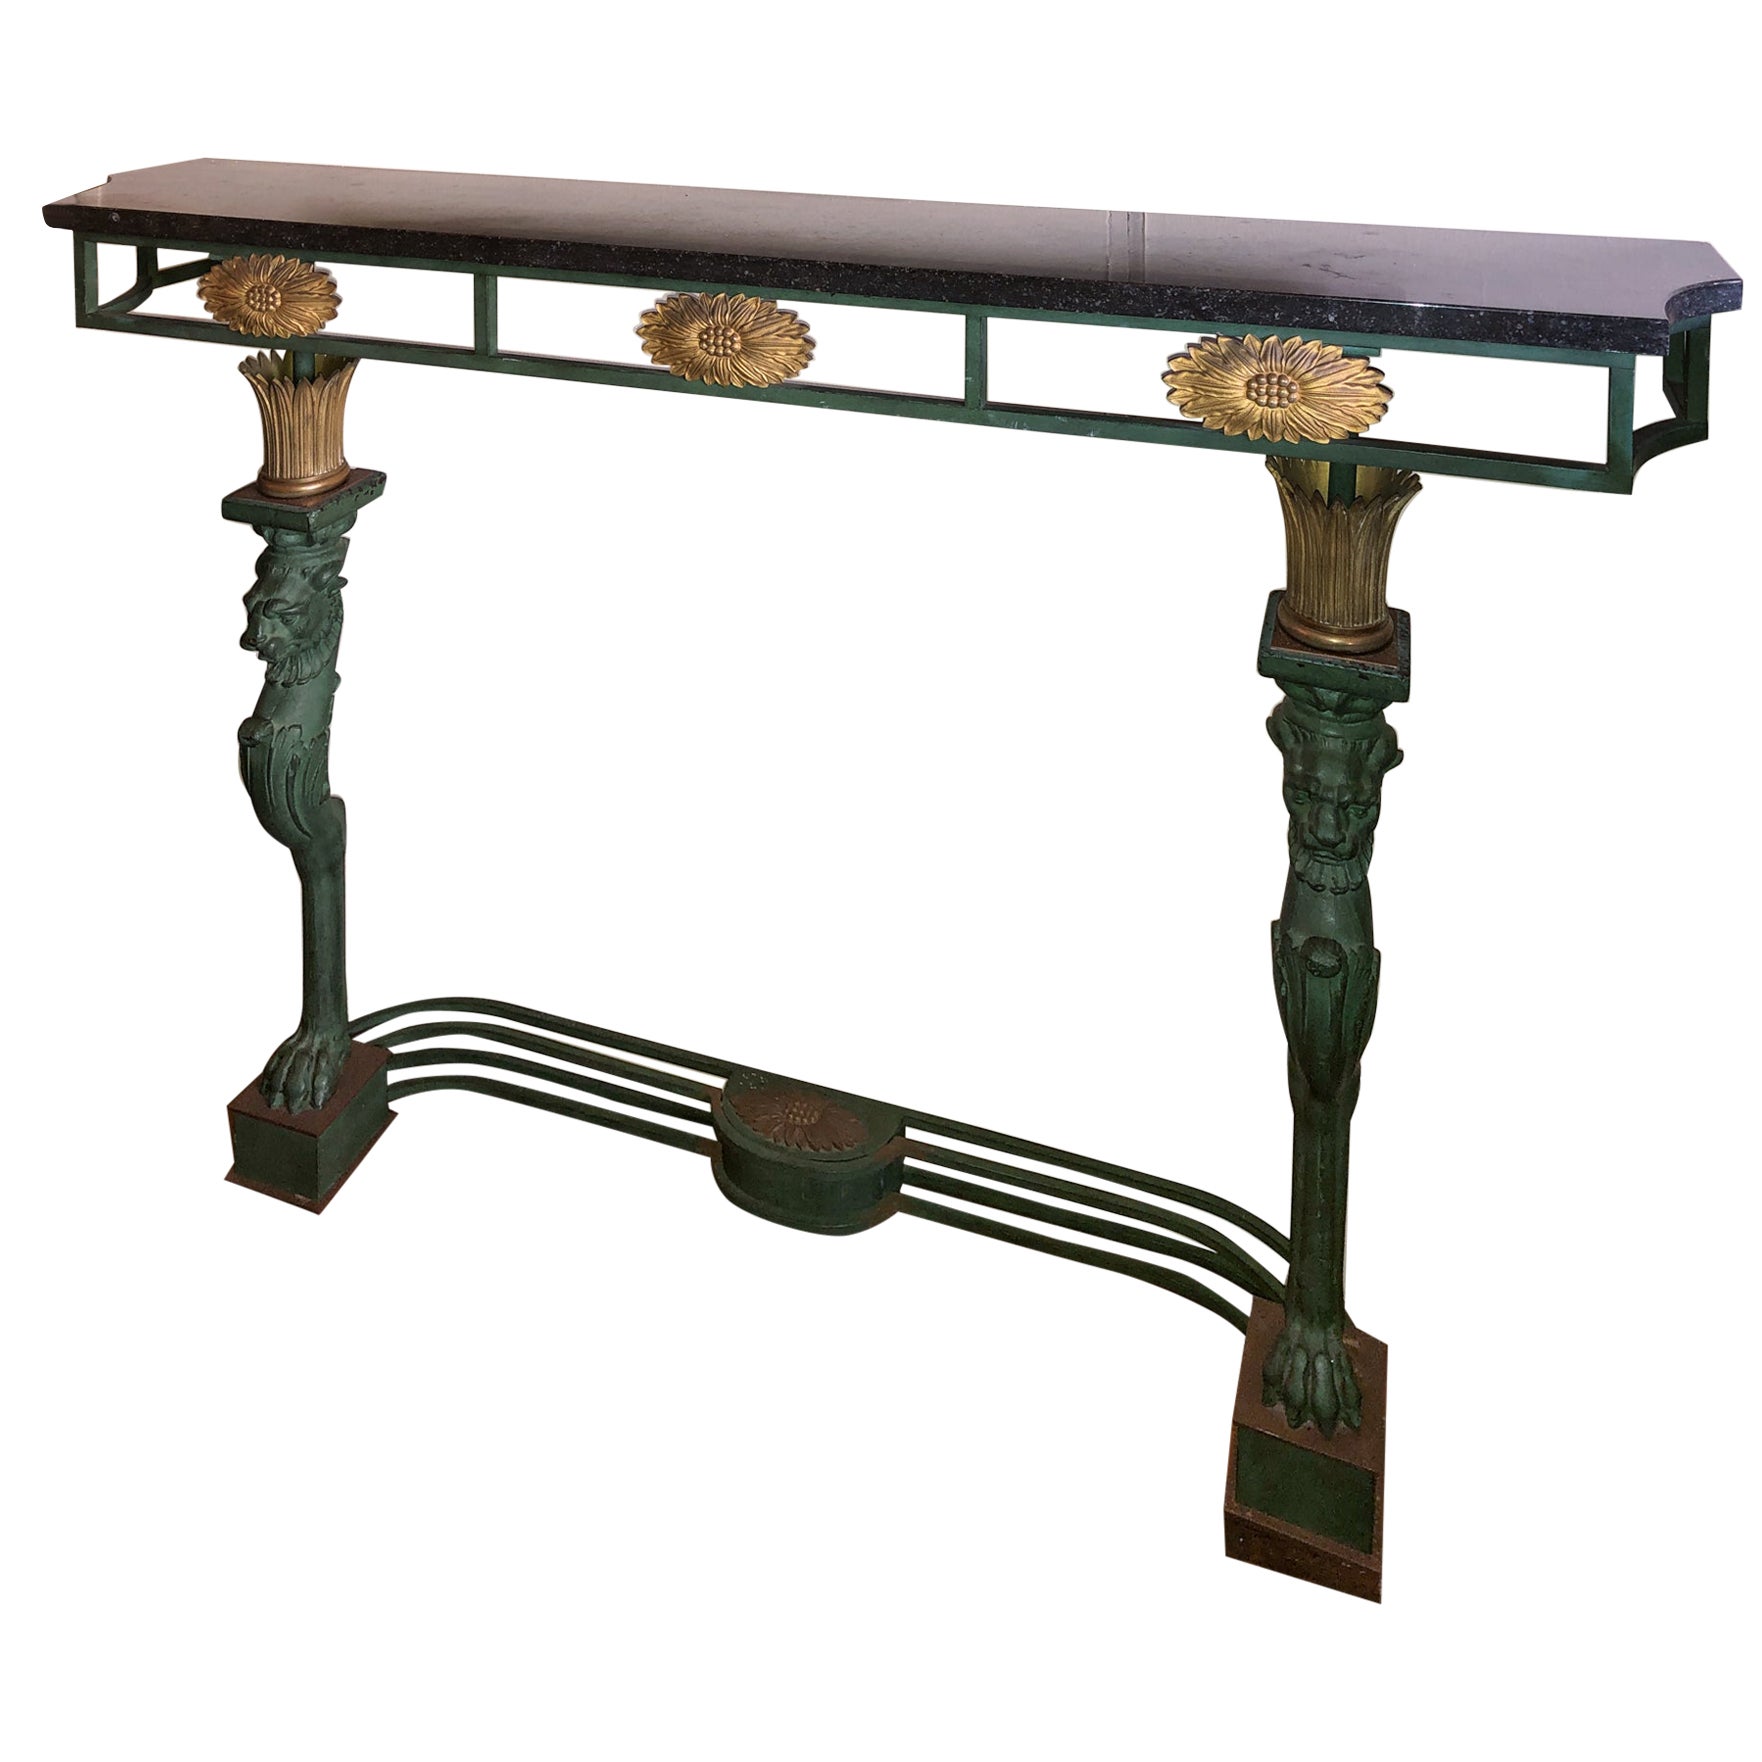 French Neoclassic//Directoire' Style Marble Top Gilt Bronze & Iron Console Table